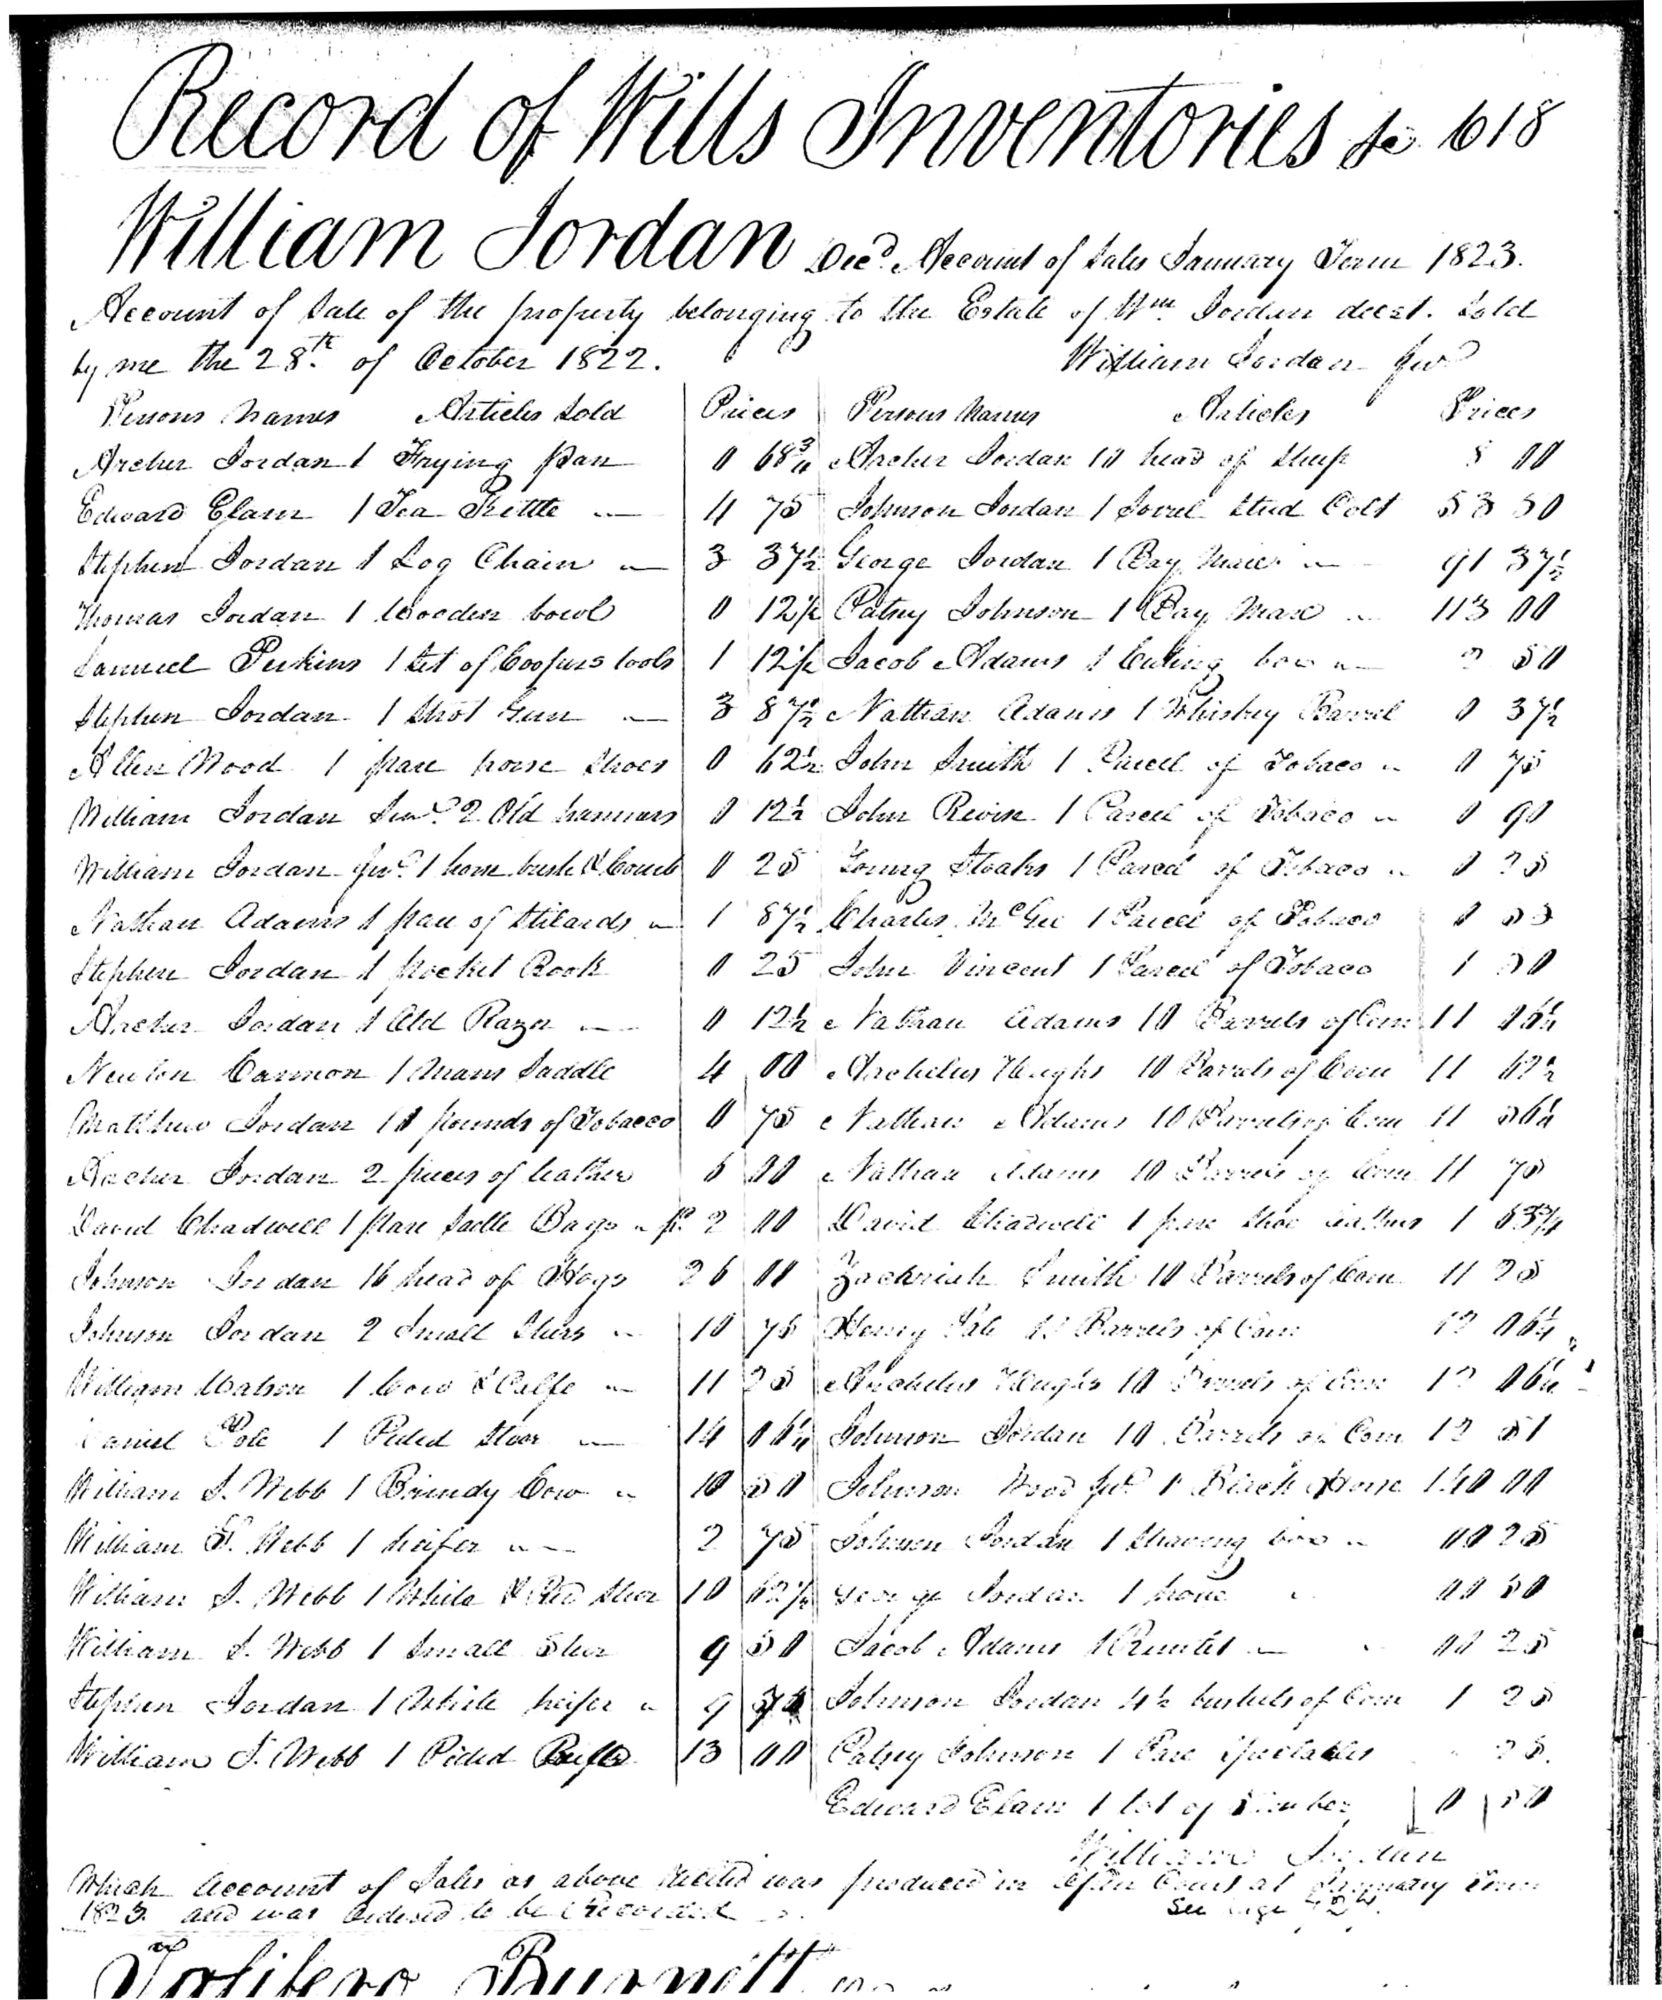 Tennessee, Wills and Probate Records, 1779-2008, for William Jordan, Williamson Will Books, Vol 1-3, 1800-1825